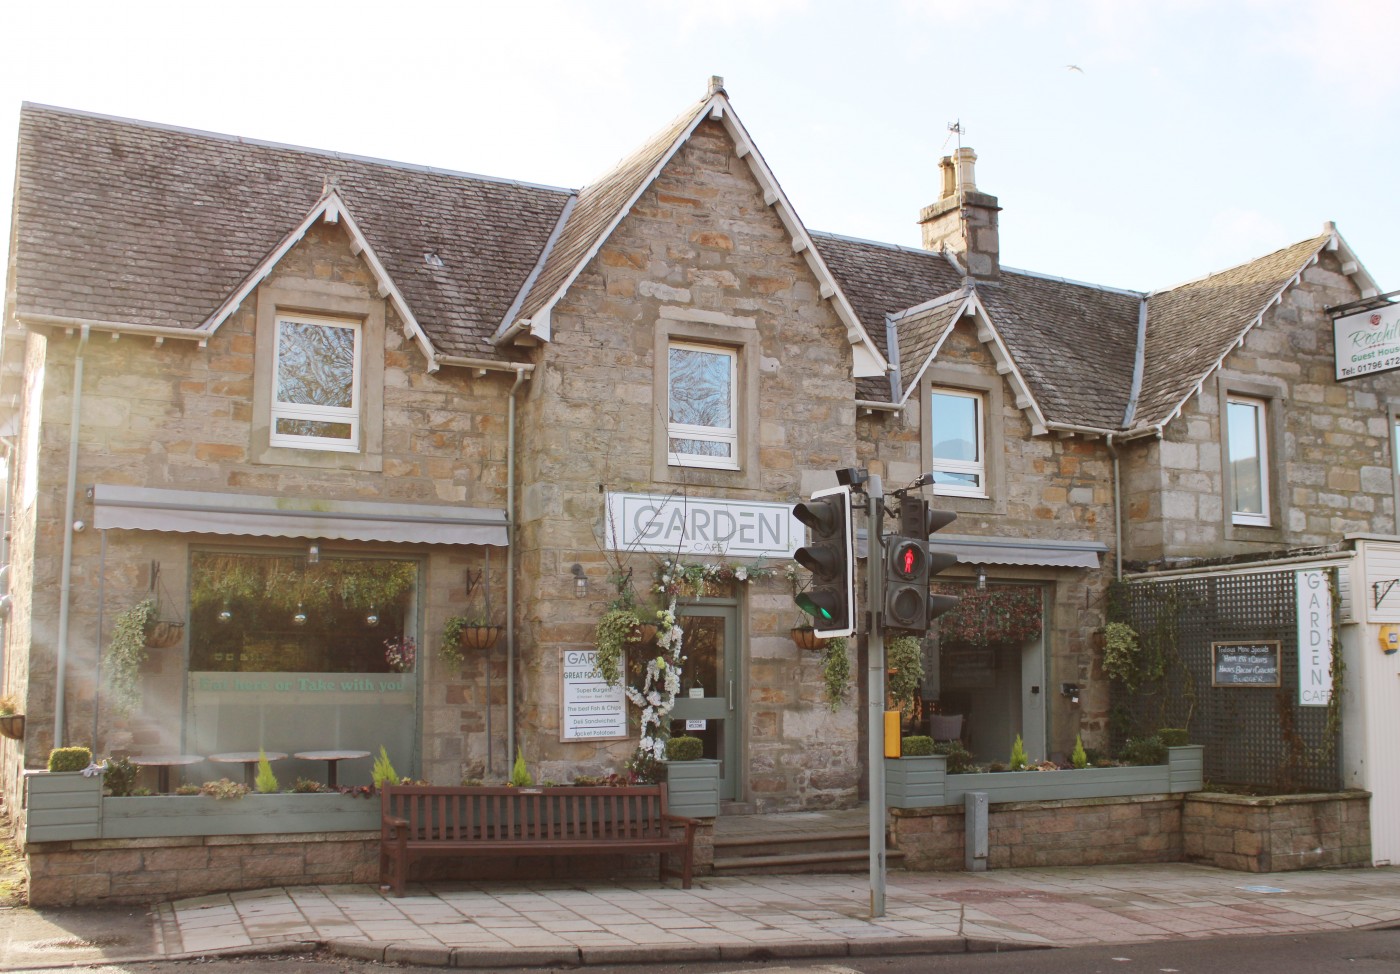 Garden Café and restaurant located in Pitlochry town centre